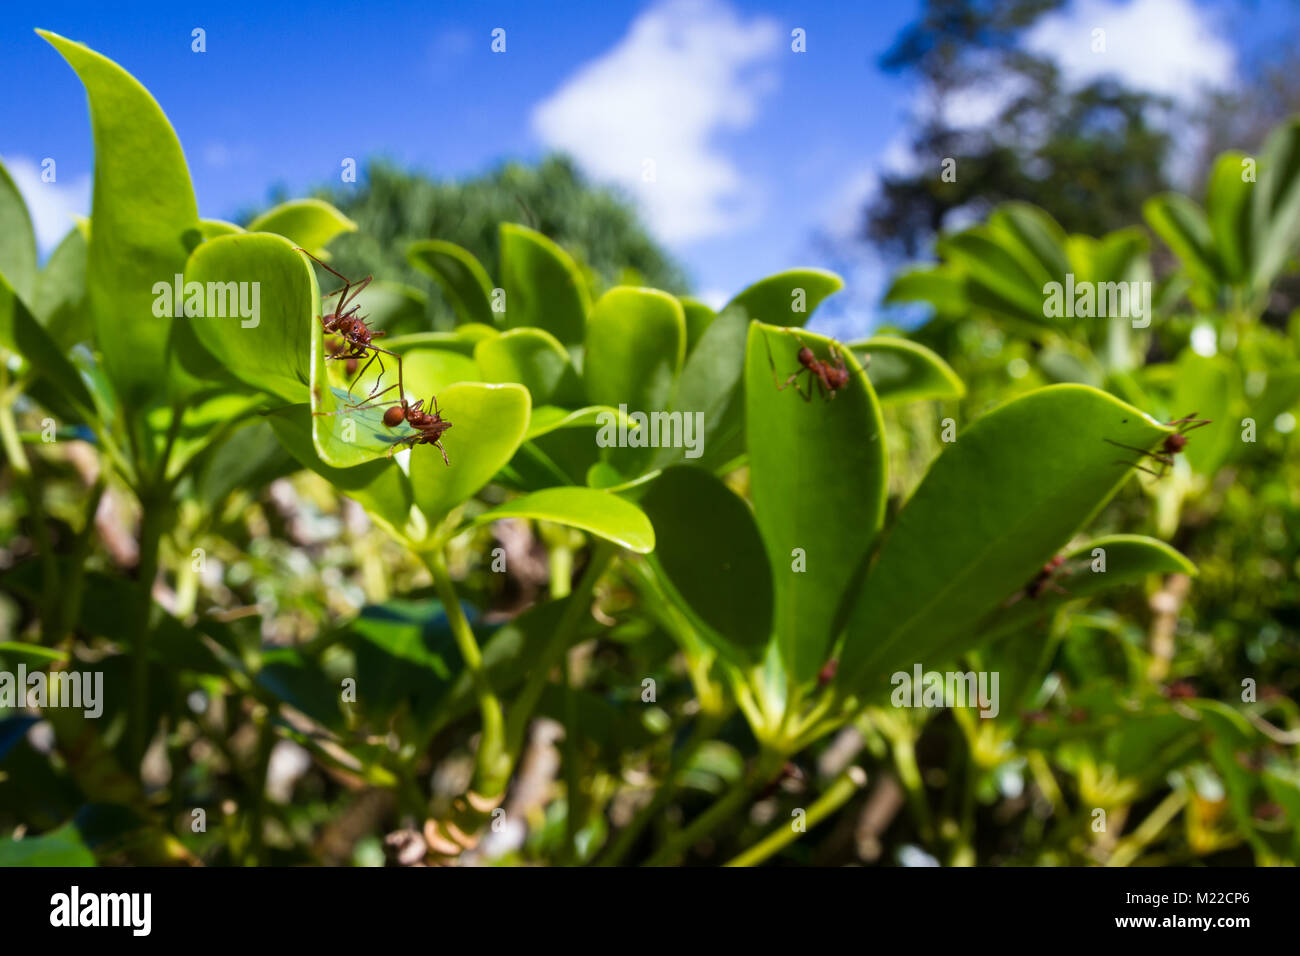 Leaf cutter ants stripping down a decorative plant in the Costa Rican rainforest Stock Photo